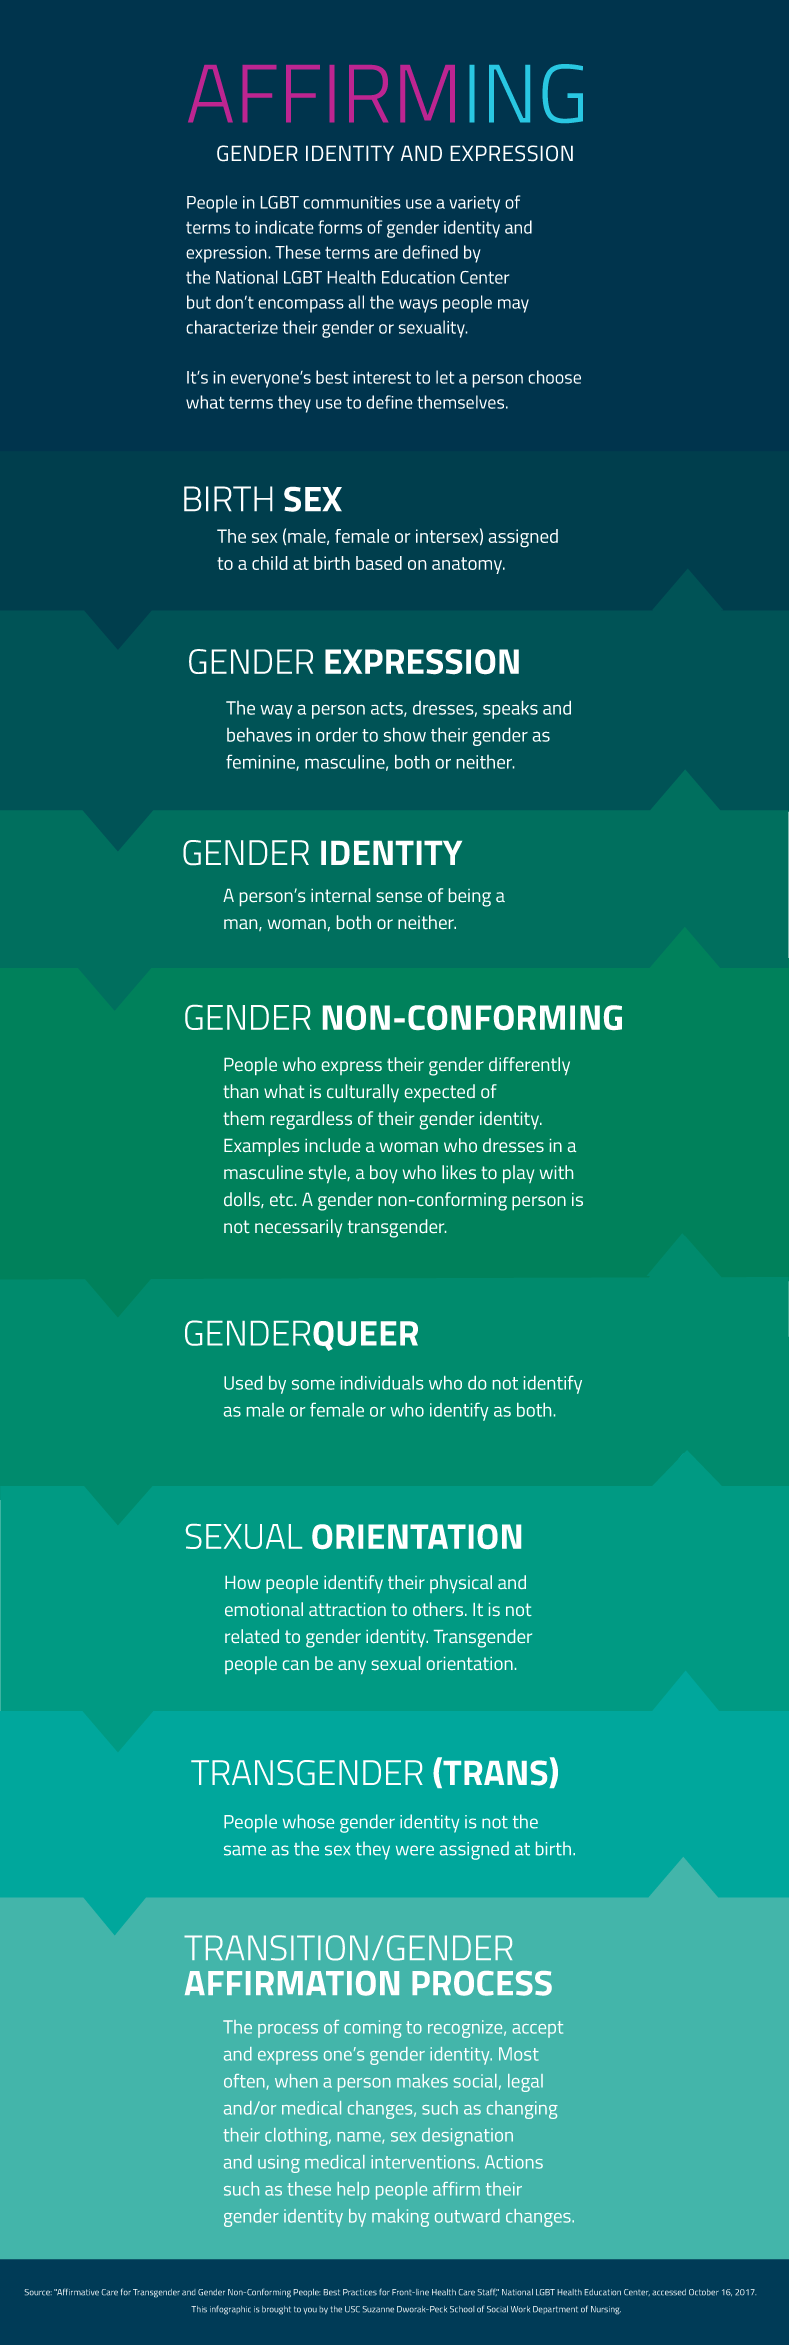 Affirming Gender Identity and Expression